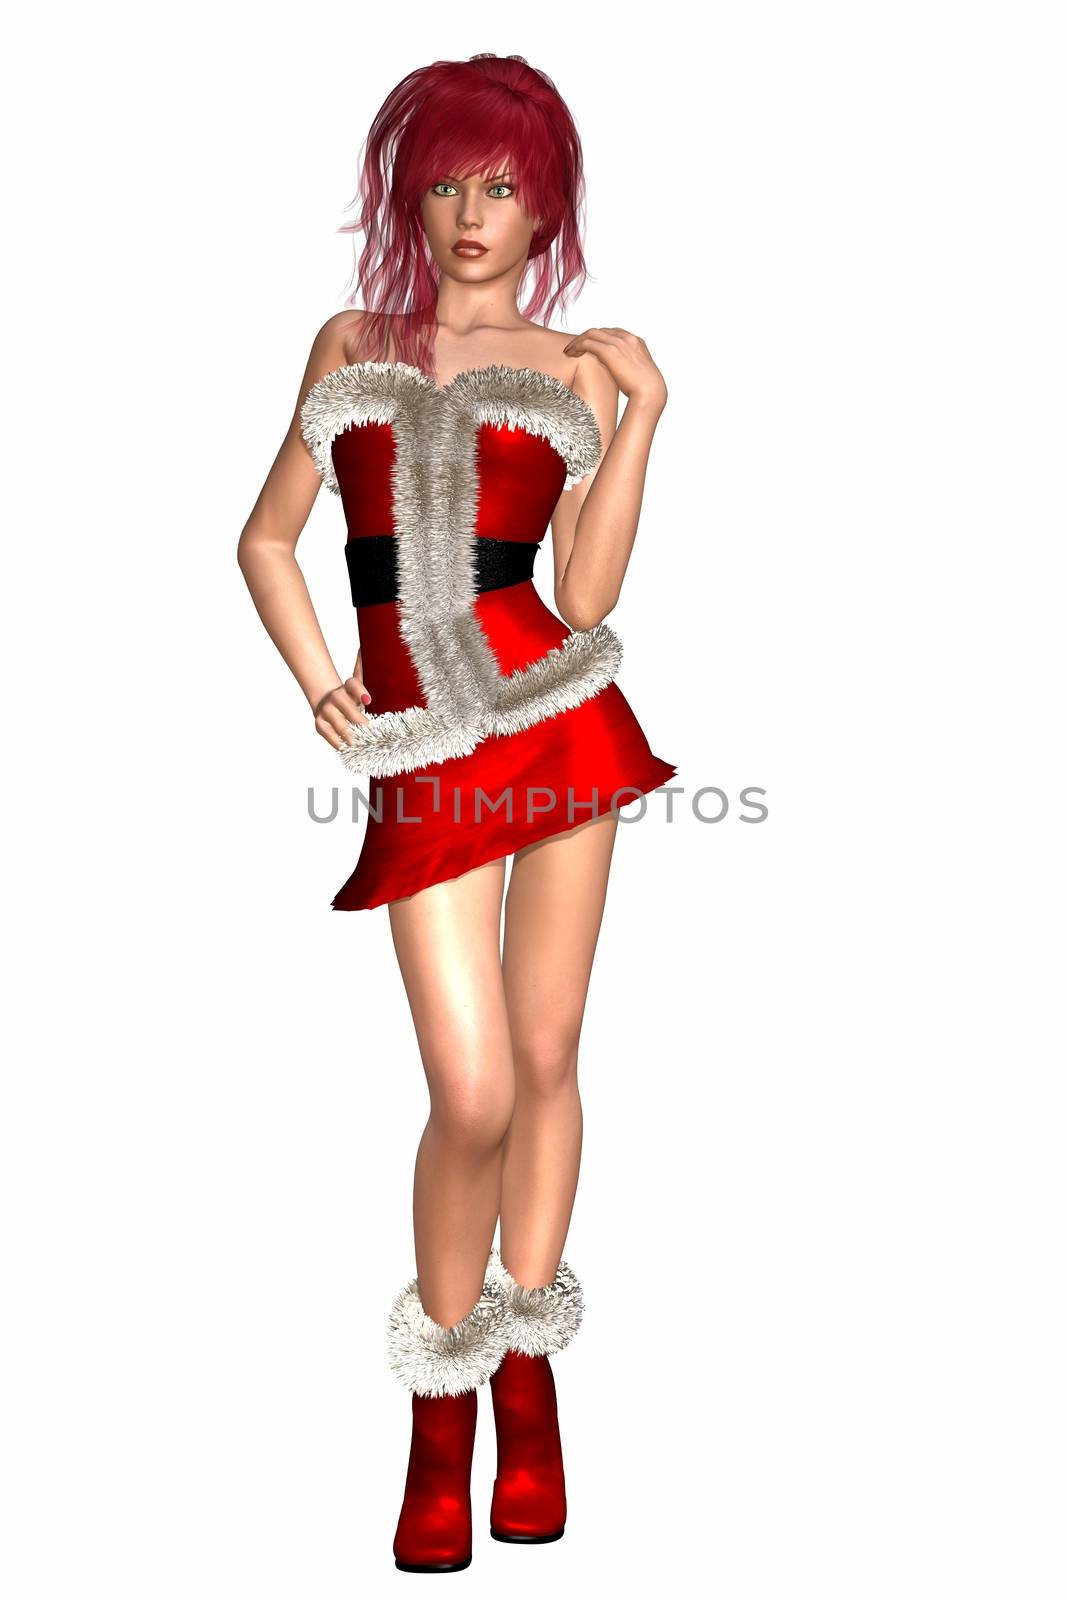 Digital Illustration of a Woman in Christmas Dress